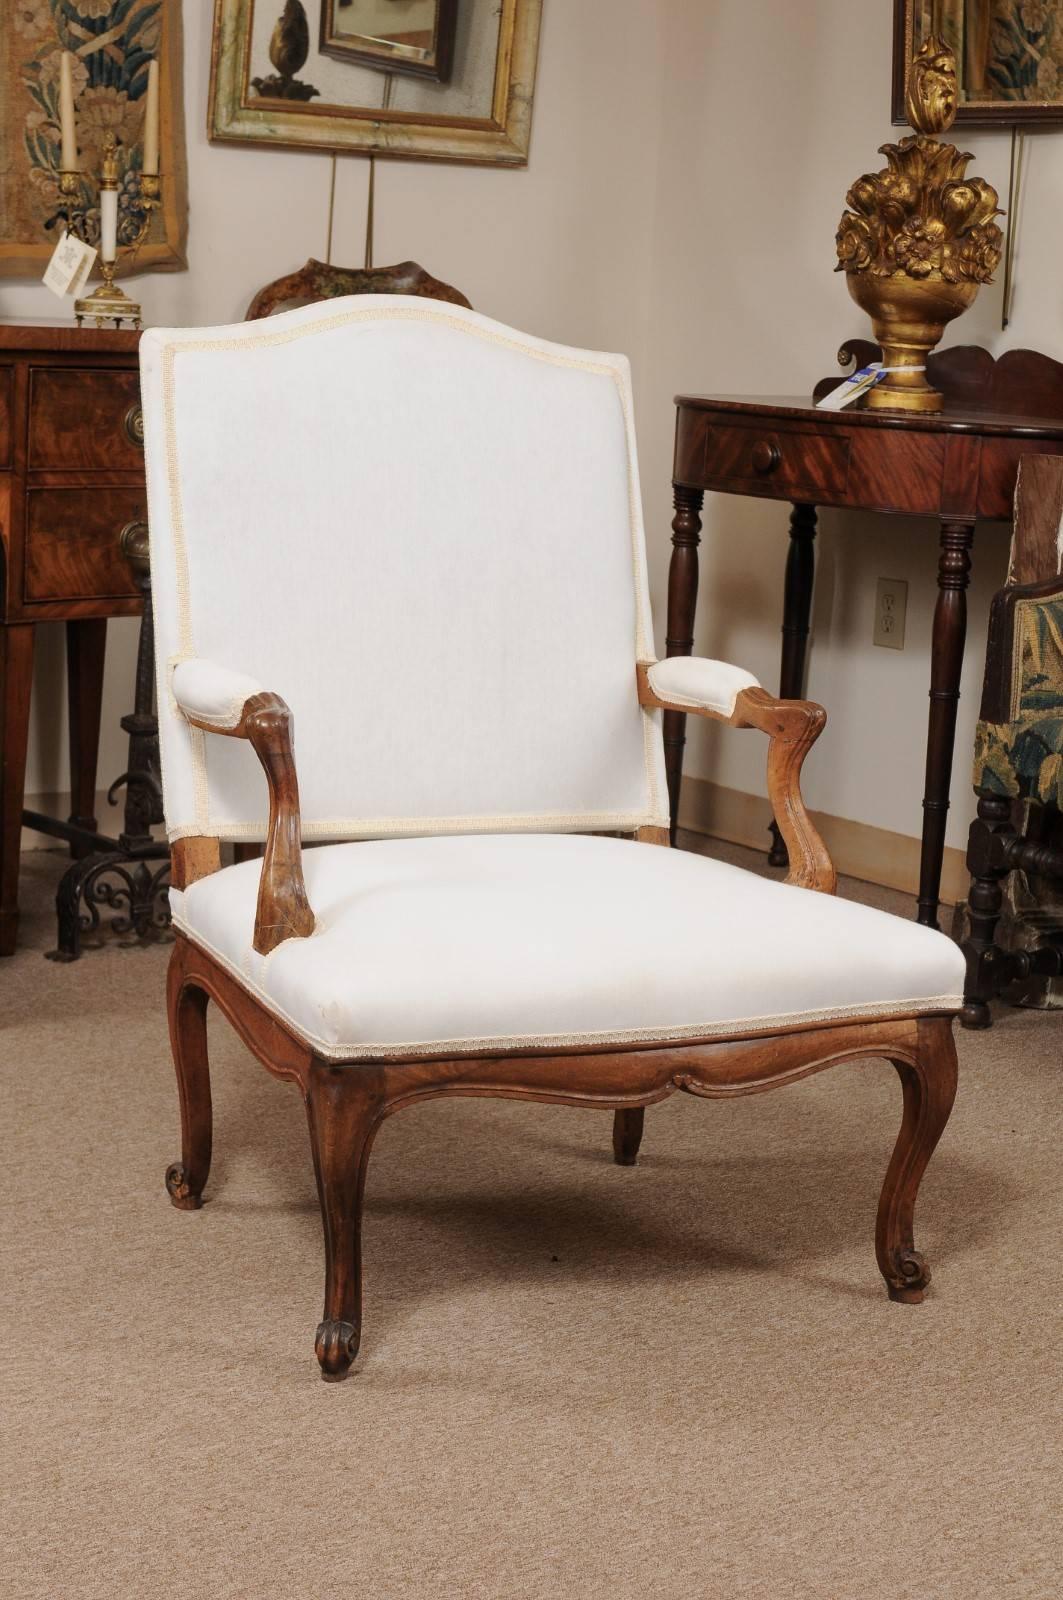 Louis XV Period walnut fauteuil / open arm chair on cabriole legs, France, ca. 1740-60.